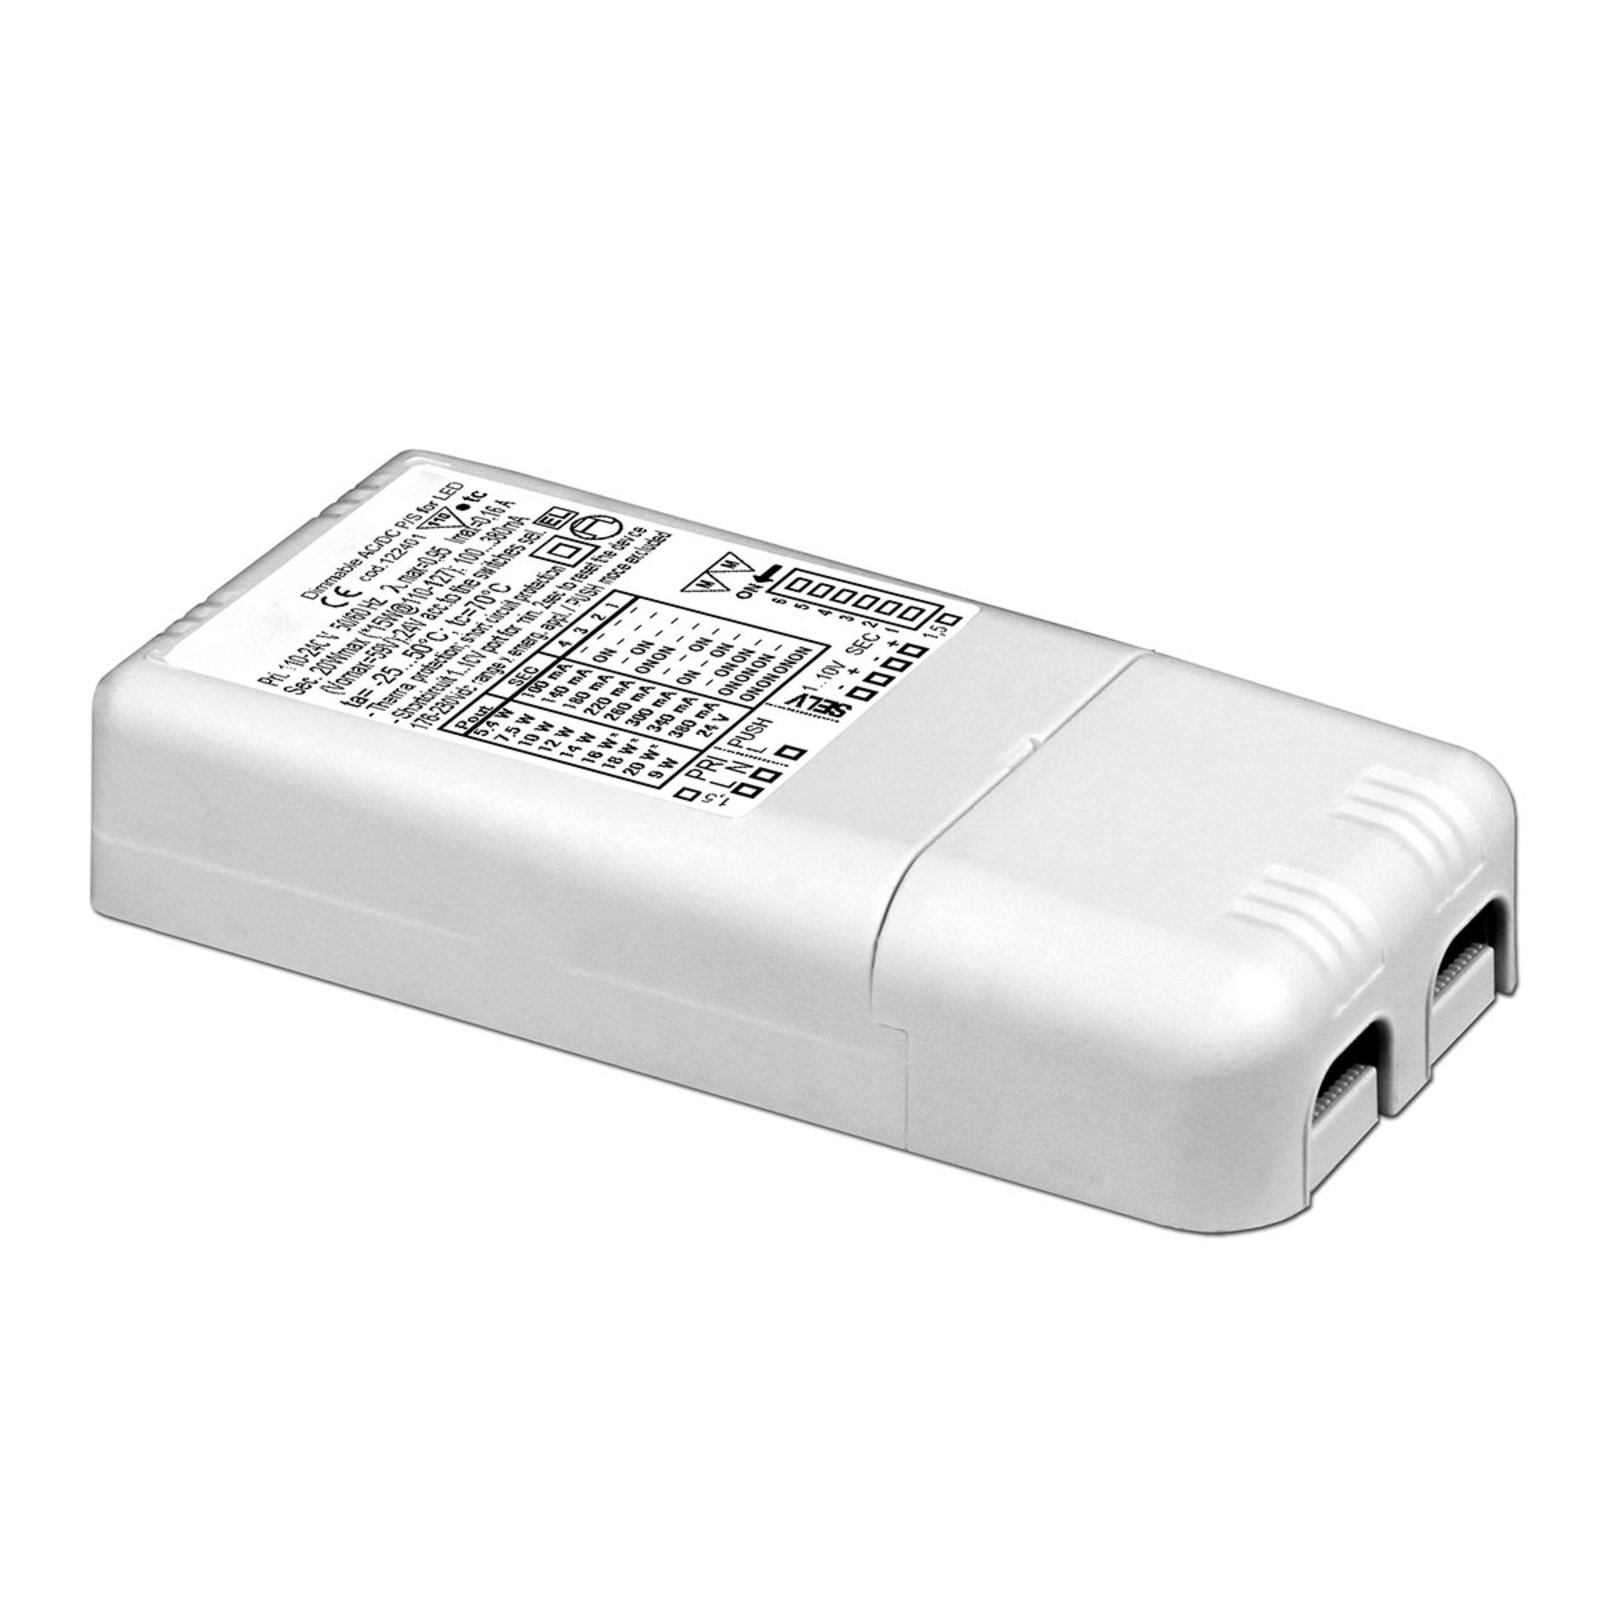 Universal LED converter, adjustable, not dimmable